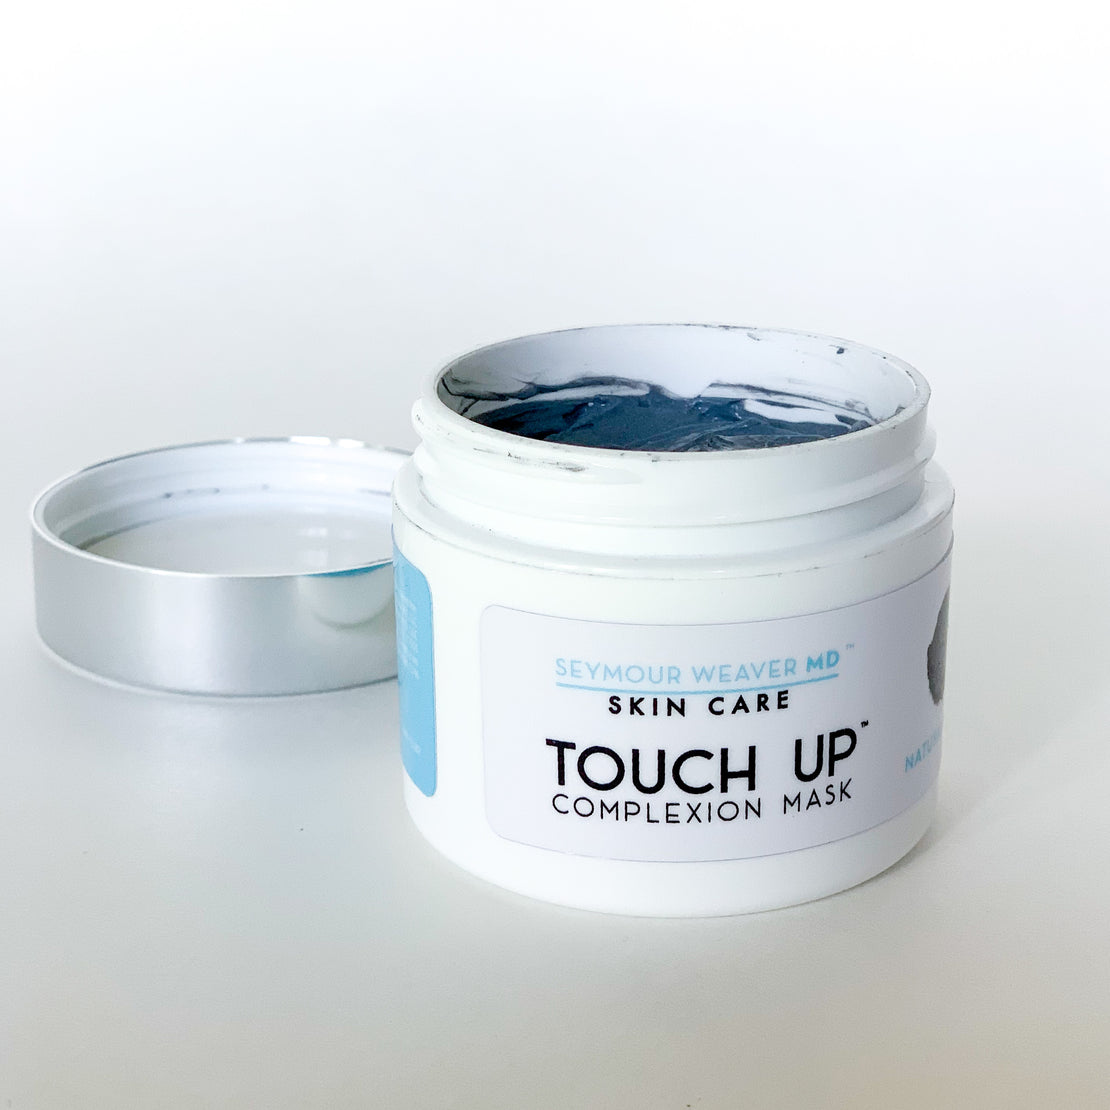 Seymour Weaver TOUCH UP Complexion Mask 4